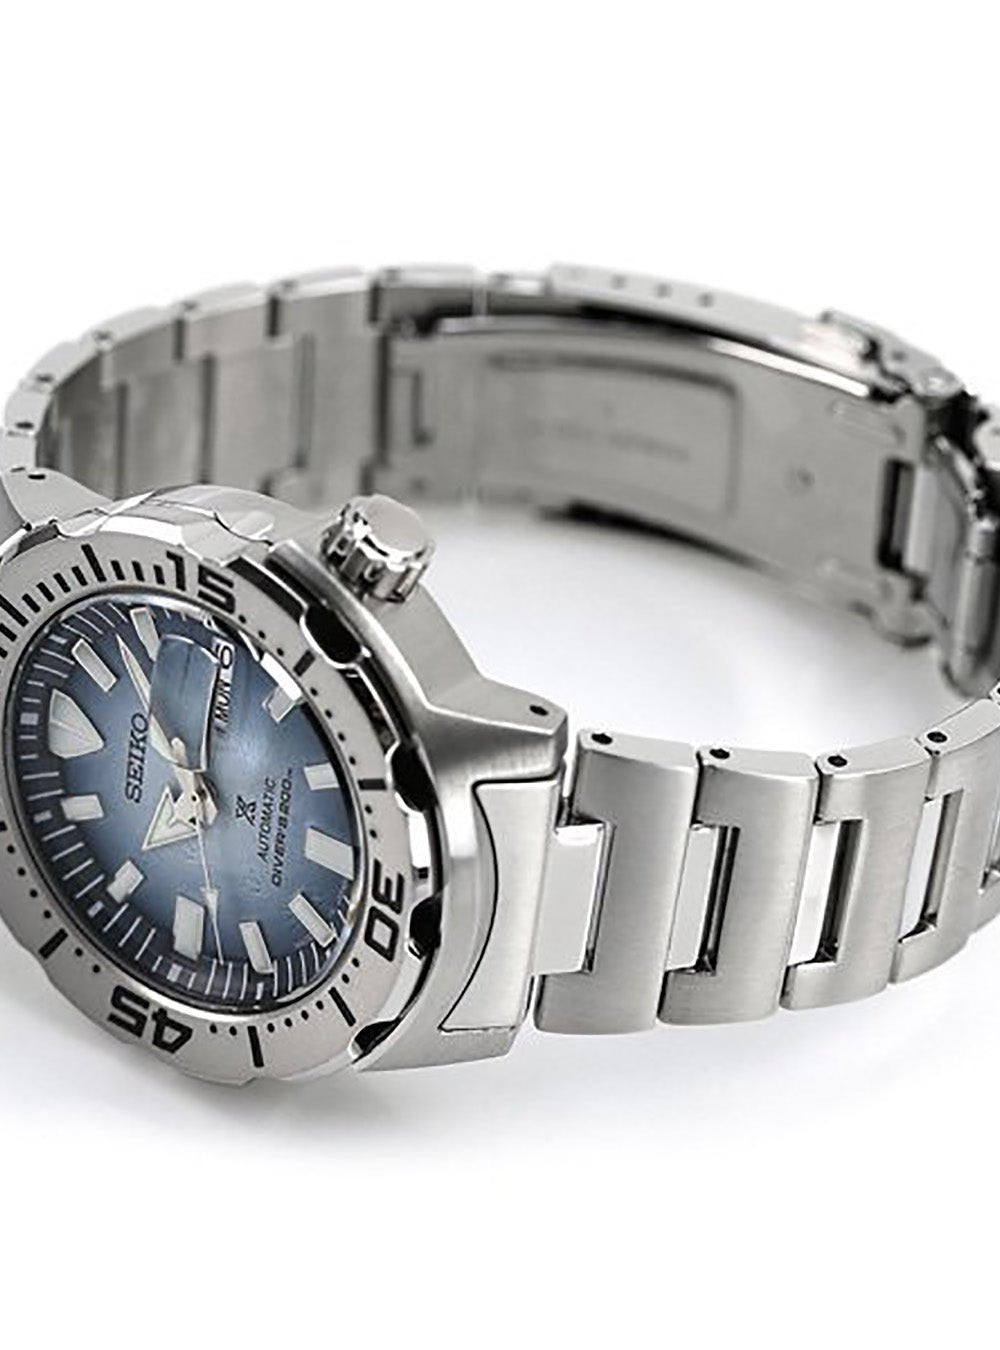 SEIKO PROSPEX DIVER SCUBA SAVE THE OCEAN SPECIAL EDITION MONSTER SBDY105 MADE IN JAPAN JDMWRISTWATCHjapan-select